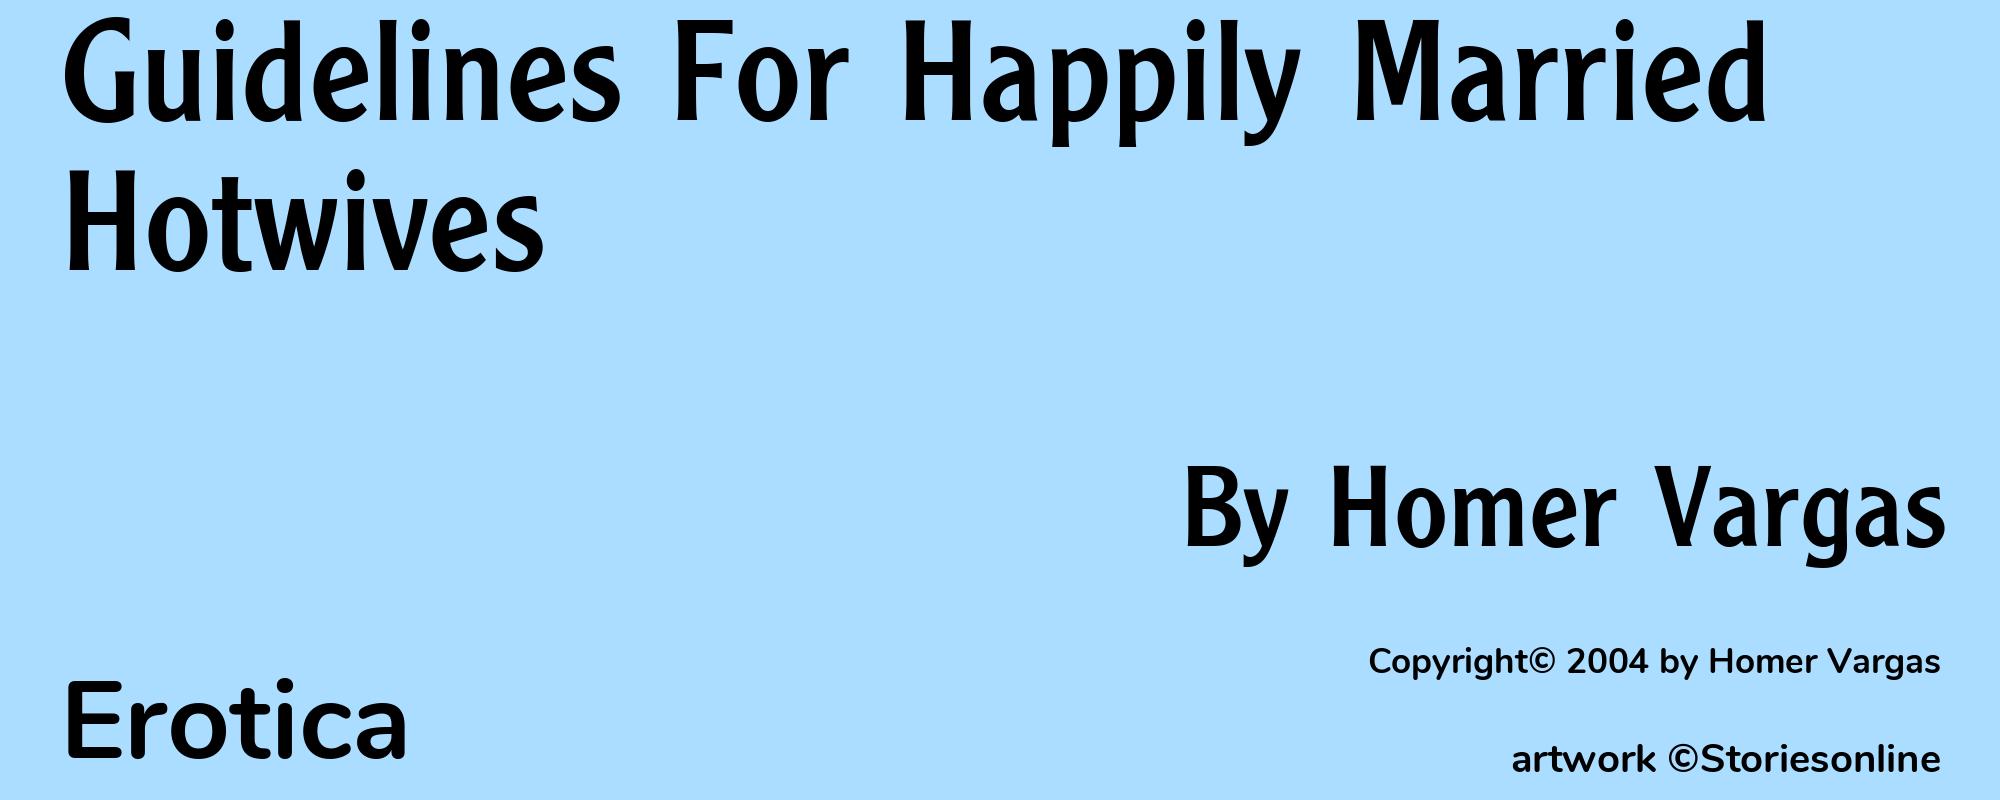 Guidelines For Happily Married Hotwives - Cover